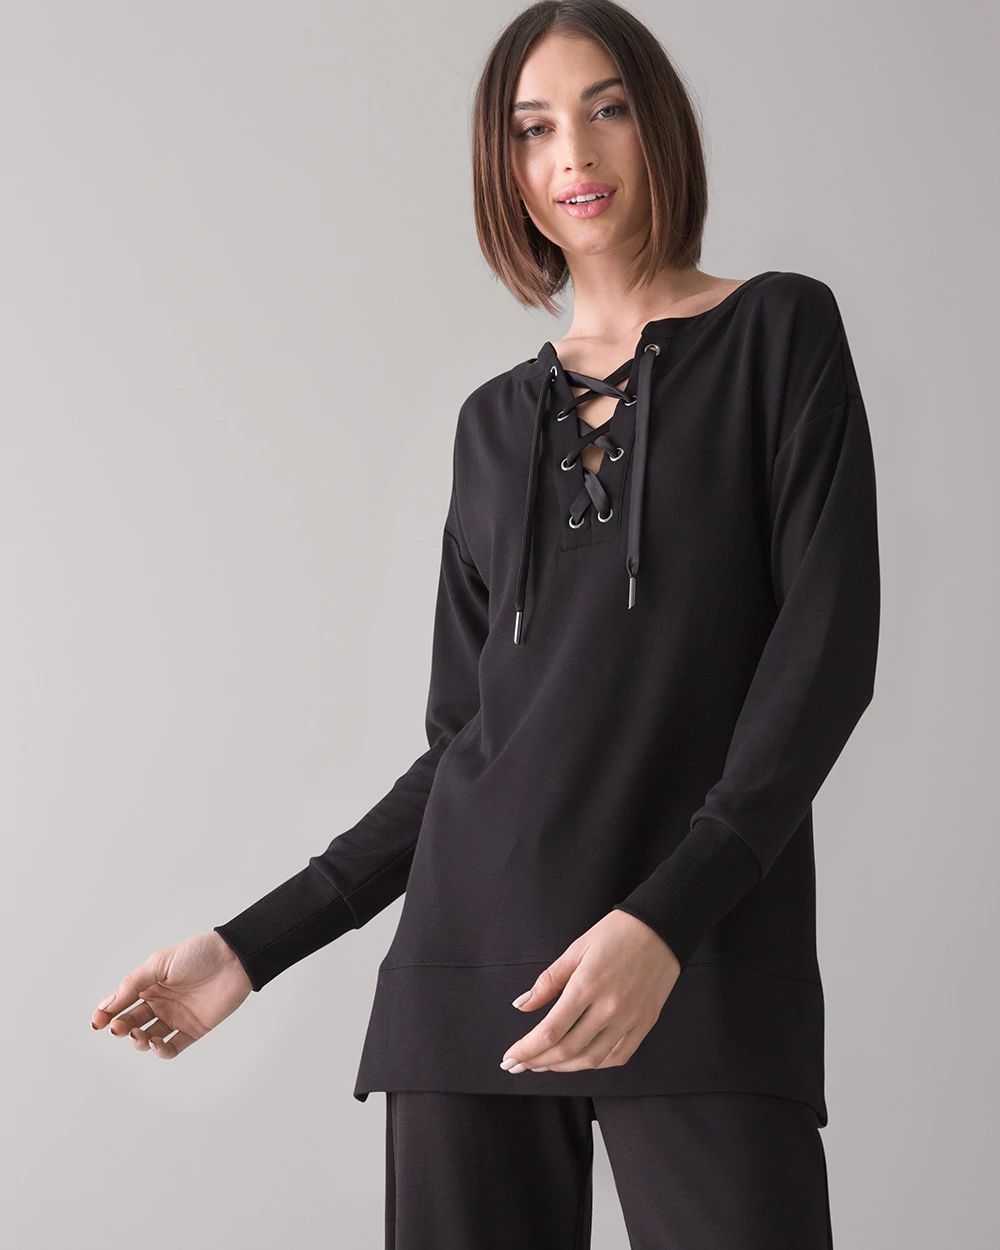 Lace Up Tunic click to view larger image.